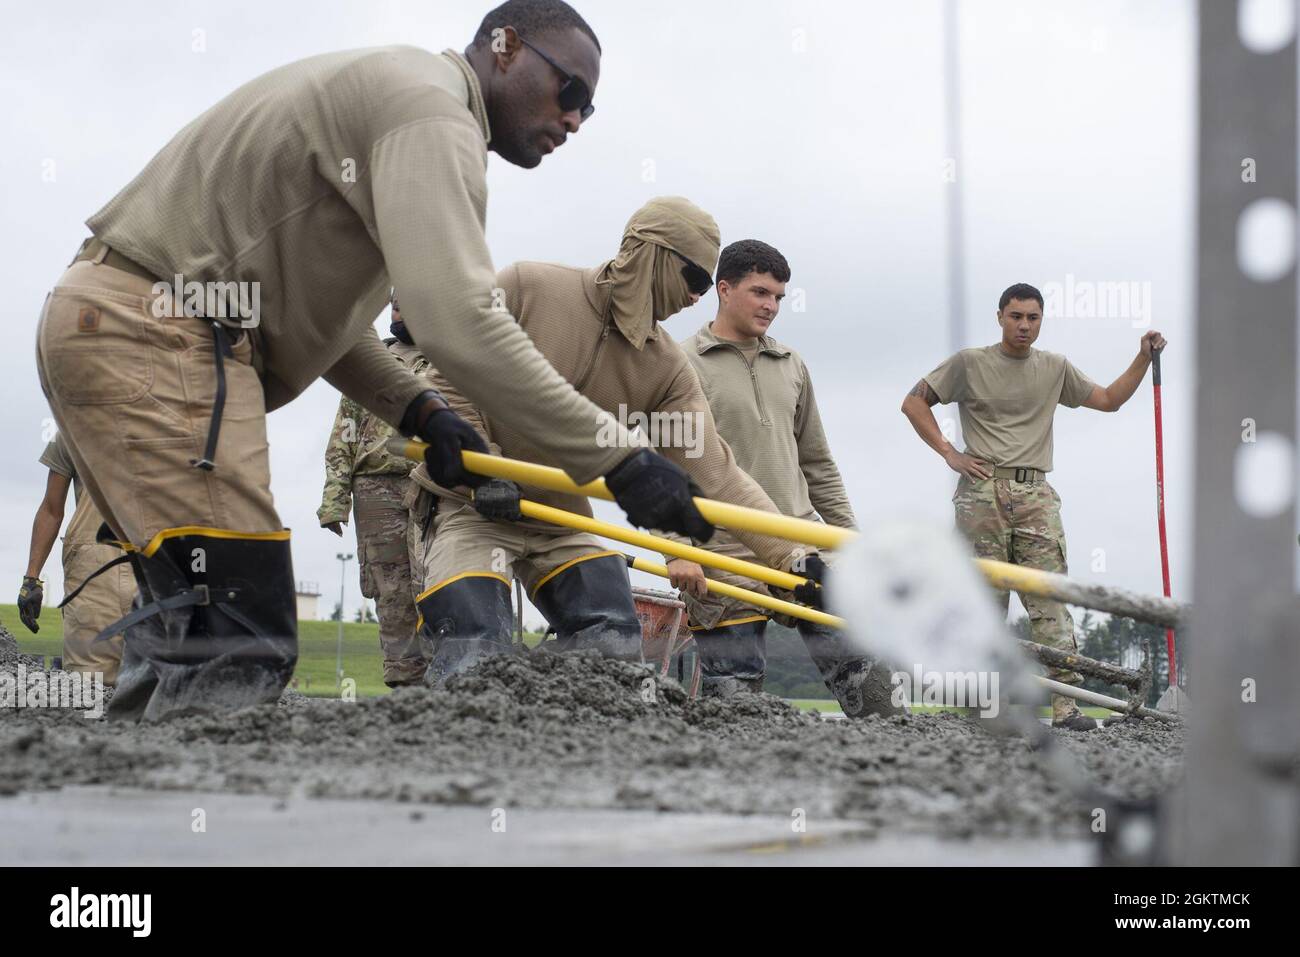 Airmen assigned to the 800th RED HORSE Group, level wet concrete as part of a construction project to expand a flightline apron June 30, 2021, at Yokota Air Base, Japan. The construction project requires Airmen assigned to the 823rd, 819th and 820th RED HORSE Squadrons to pour approximately 7,300 cubic meters of concrete and pave 650 tons of asphalt in a construction effort to increase aircraft parking capabilities at Yokota Air Base. The apron expansion is the first in an approximately four-year phased construction effort to enhance Yokota Air Base’s airlift mission capabilities. Stock Photo